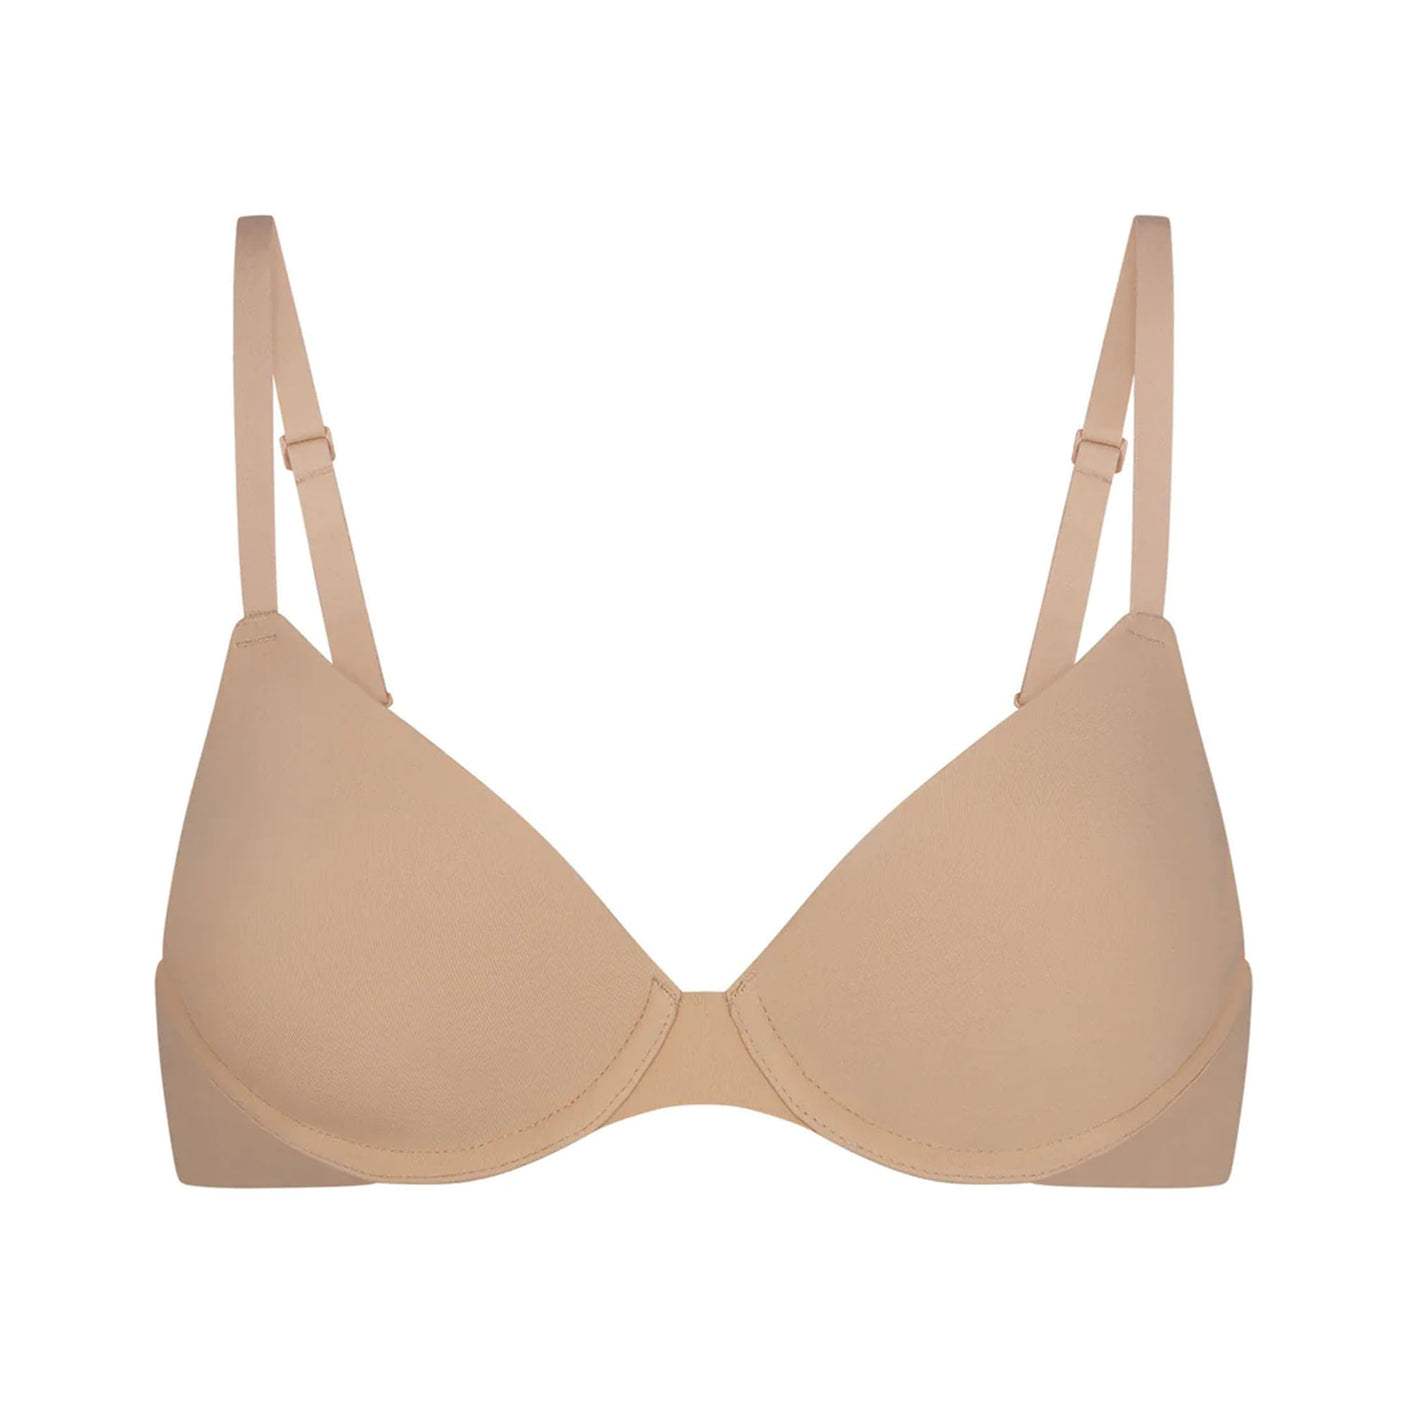 SKIMS Fits Everybody T-Shirt Push-Up Bra in Cocoa 40DD Brown